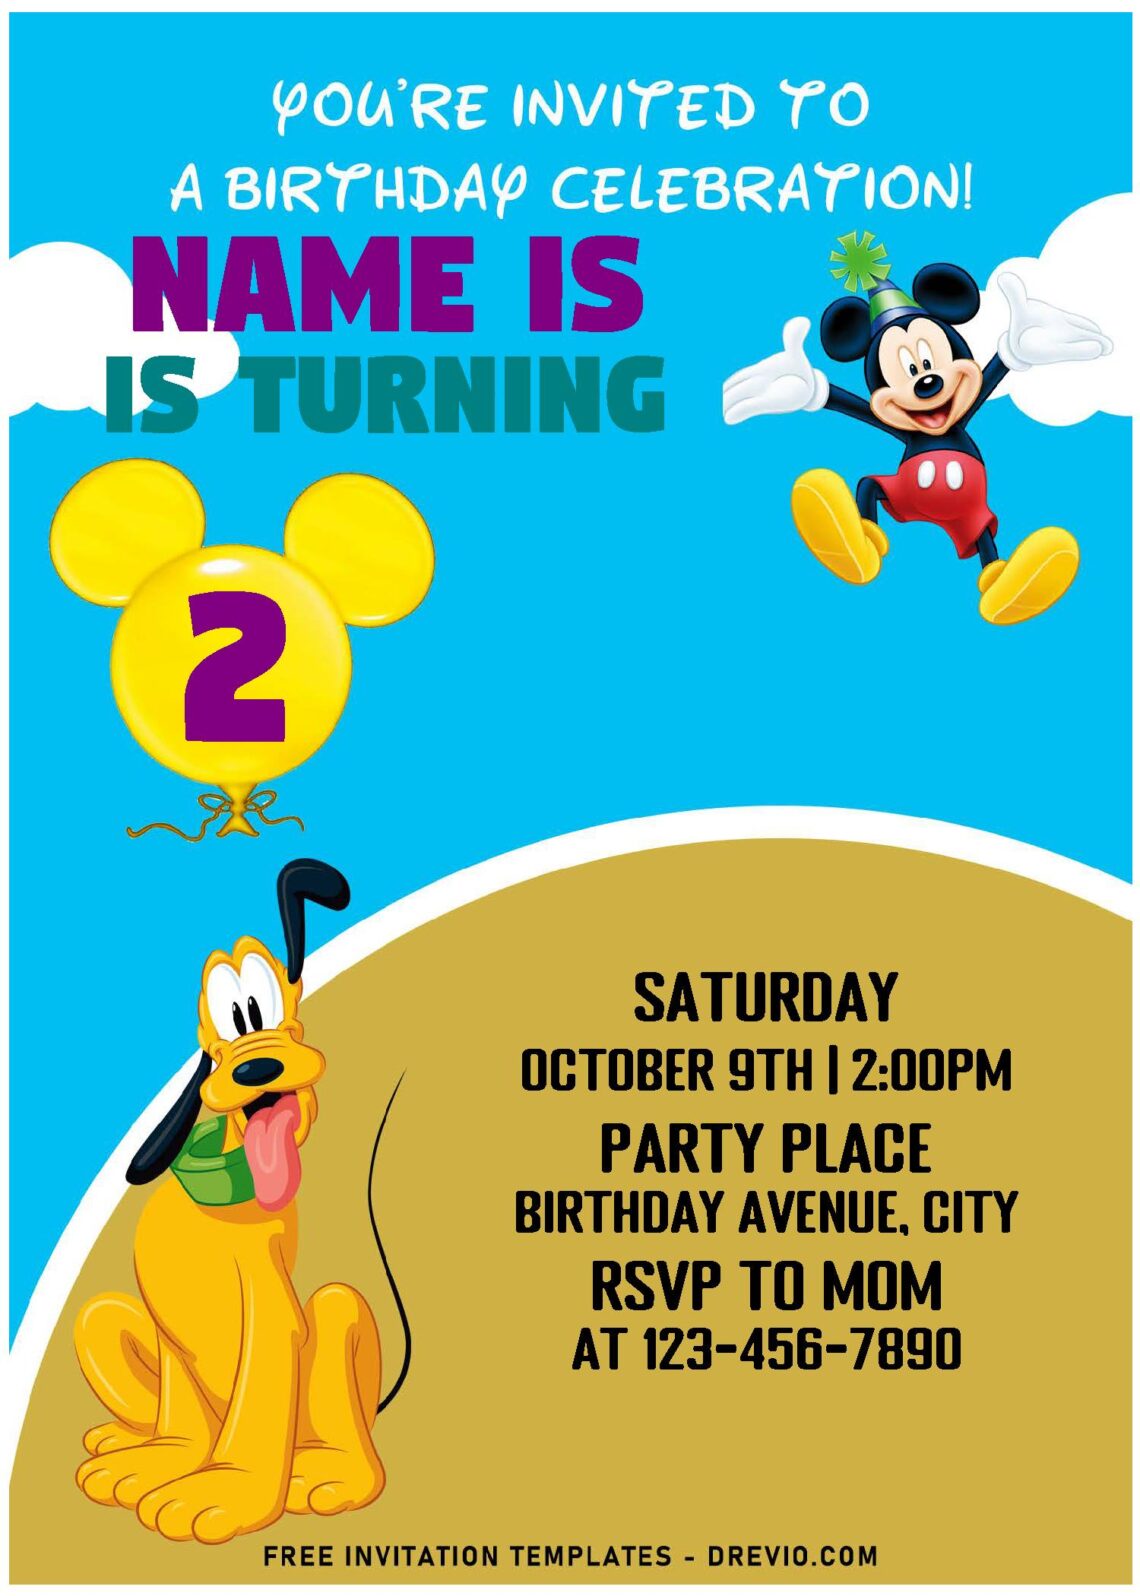 (Free Editable PDF) Ultimate Mickey Mouse Funhouse Birthday Invitation Templates with Goofy